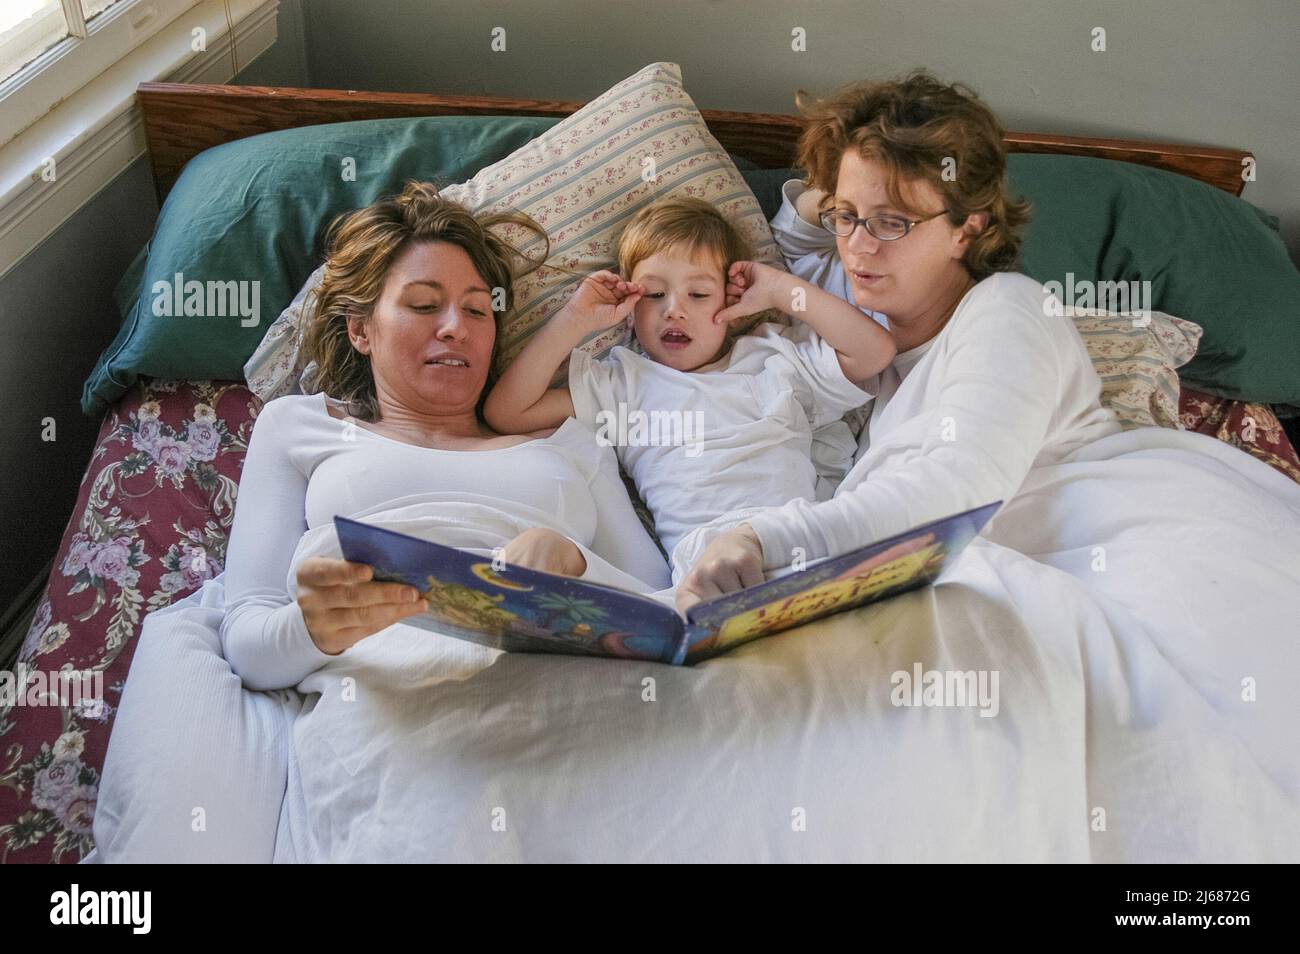 A family with two moms enjoys a morning bed together Stock Photo